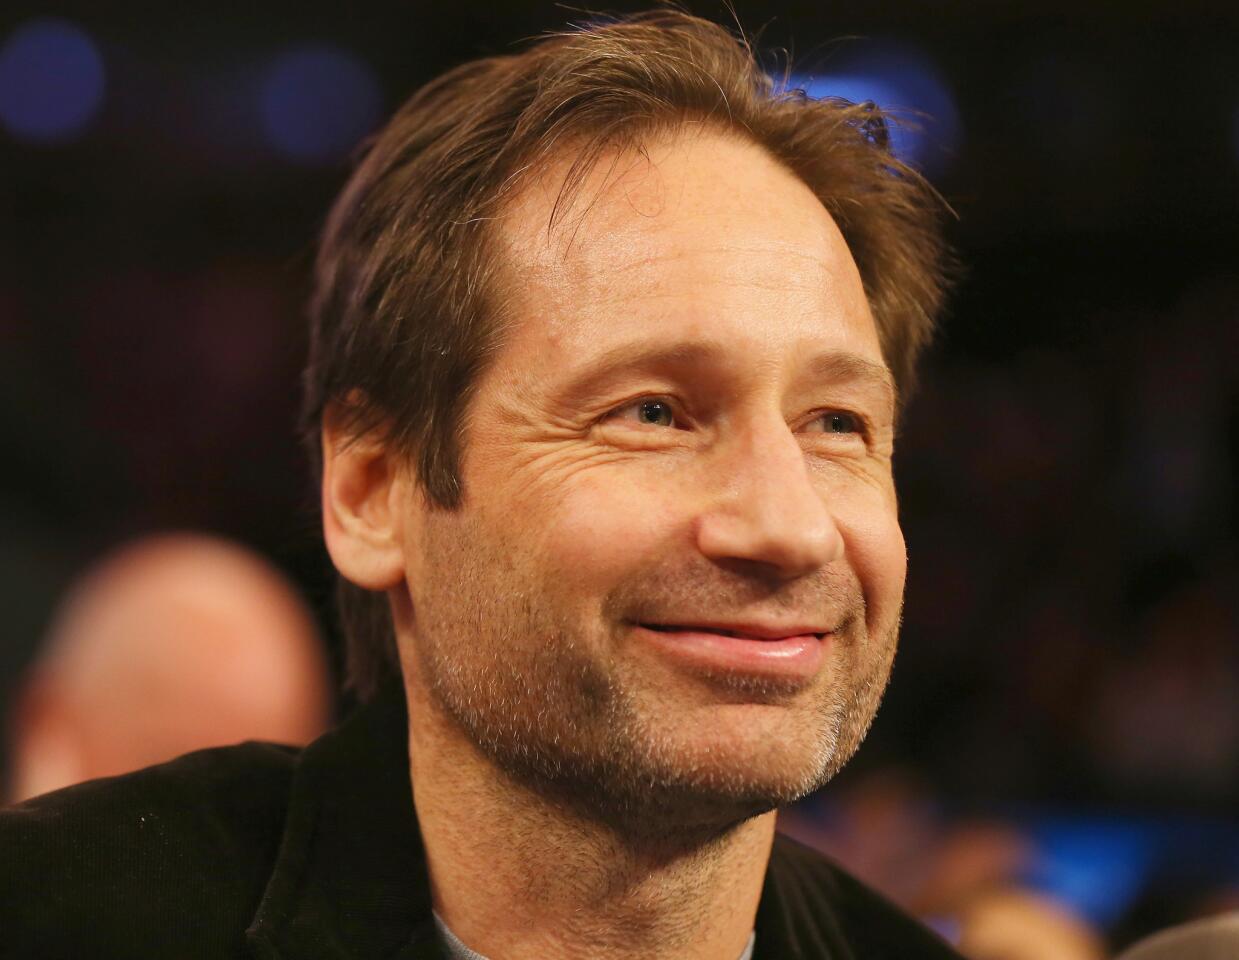 Duchovny portrayed FBI Special Agent Fox Mulder. He left the show after a contract dispute.